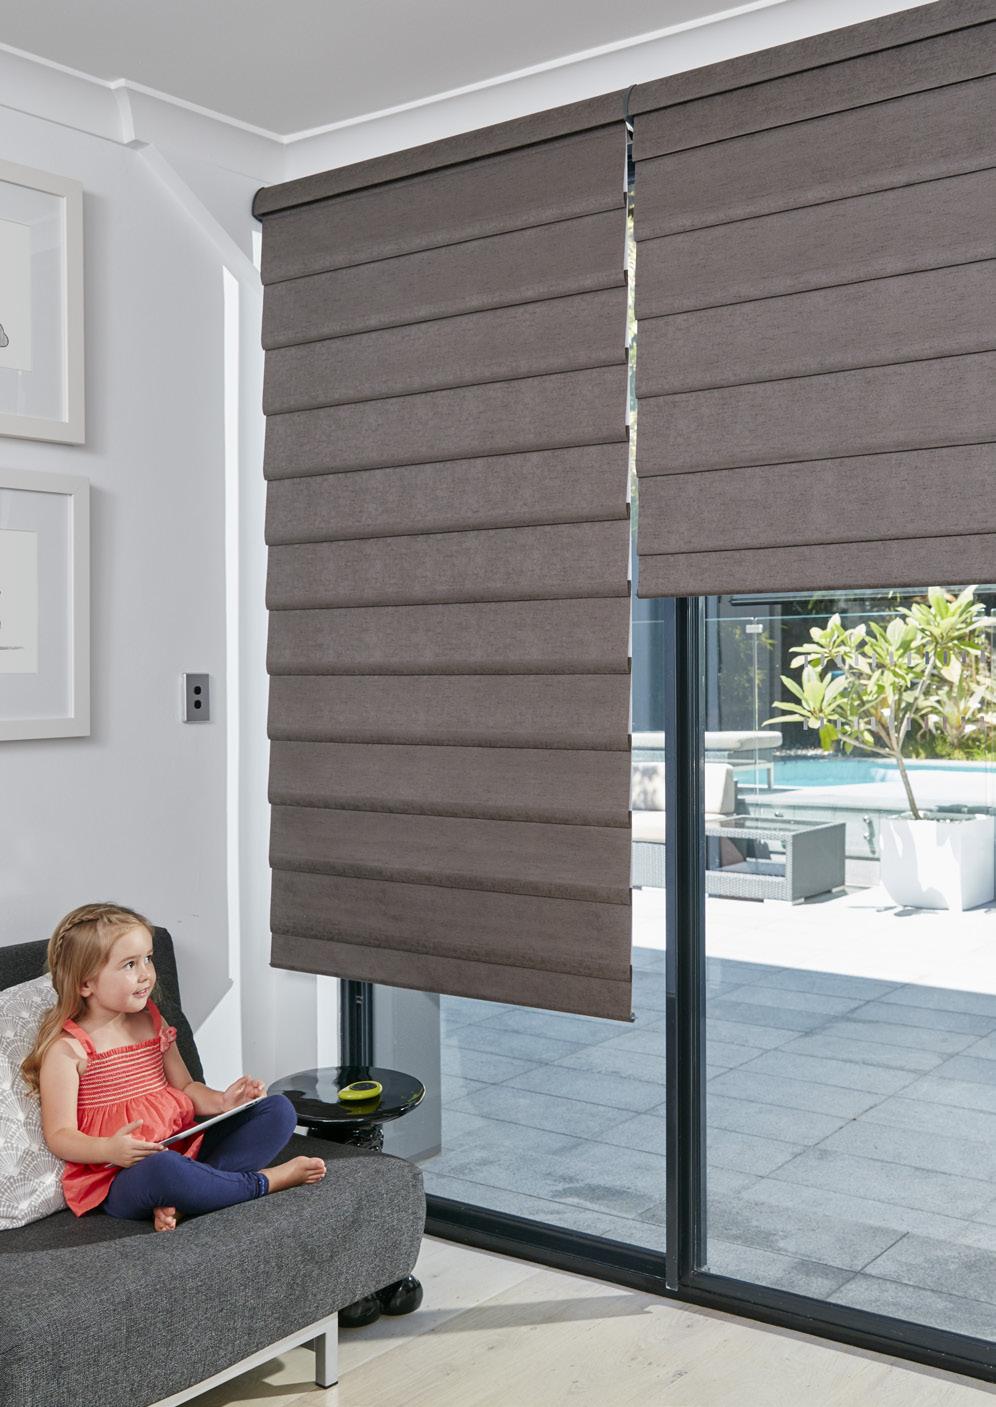 Luxaflex Modern Roman Shades Modern Roman Shades are made with anti-static, dust-resistant fabrics that repel dirt and dust. For most fabrics, the following cleaning options are available.